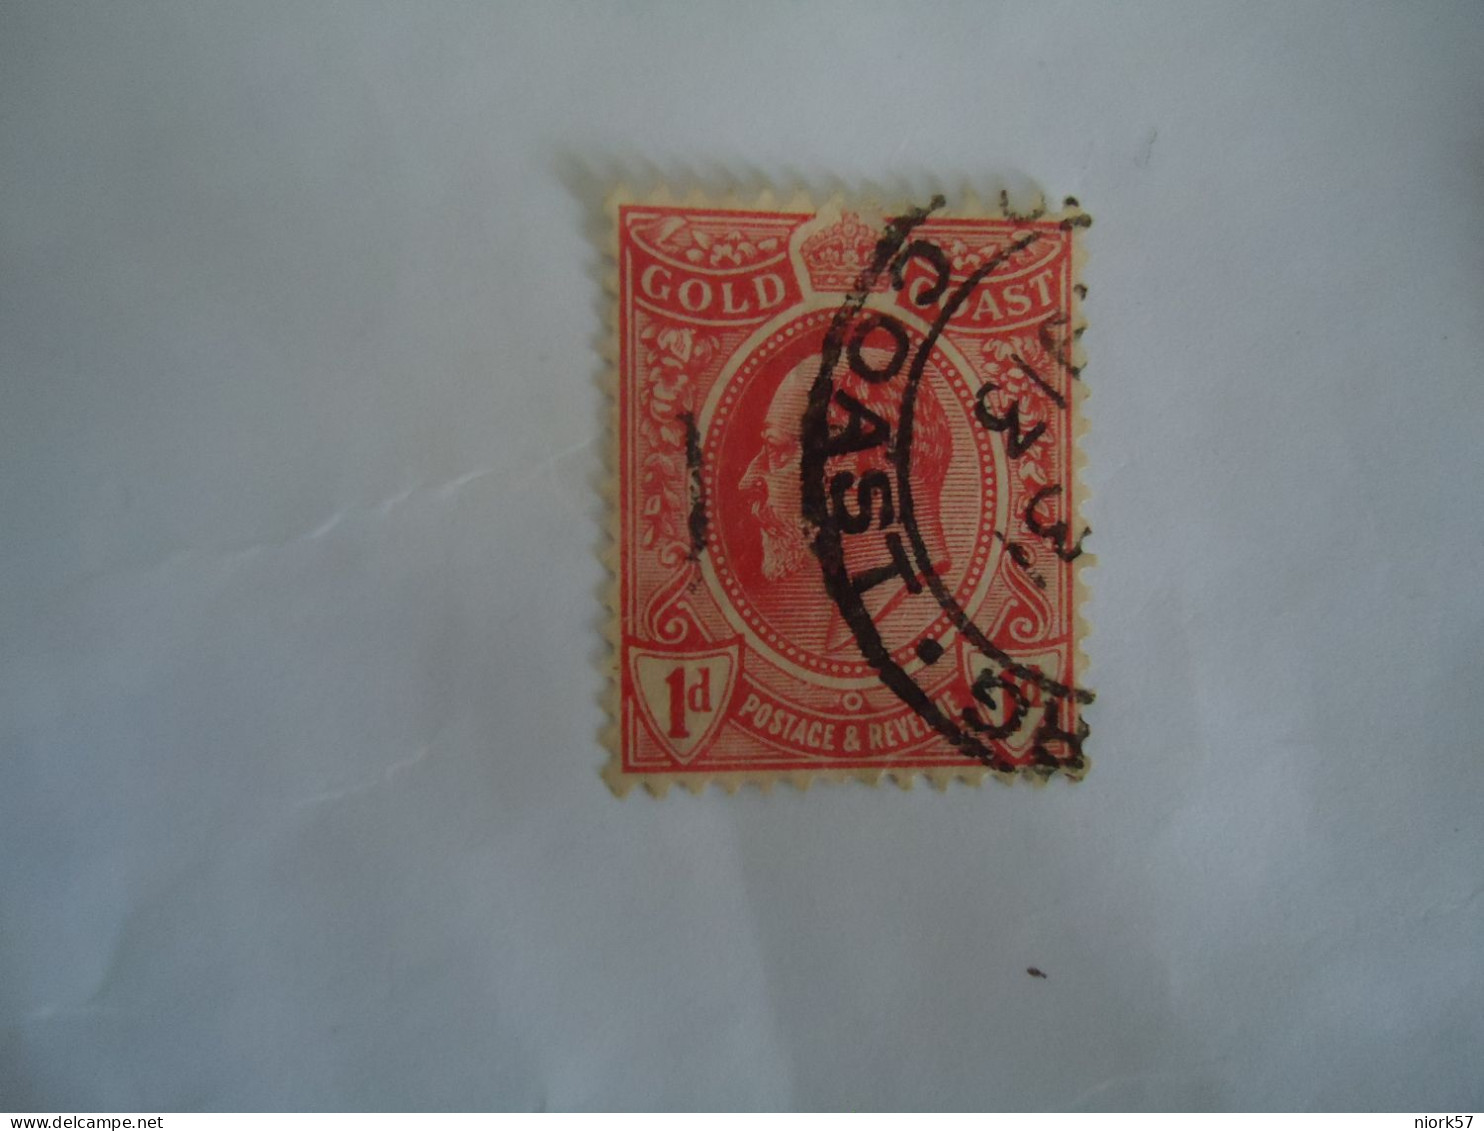 GOLD COAST  USED   STAMPS  KING  WITH POSTMARK - Goldküste (...-1957)